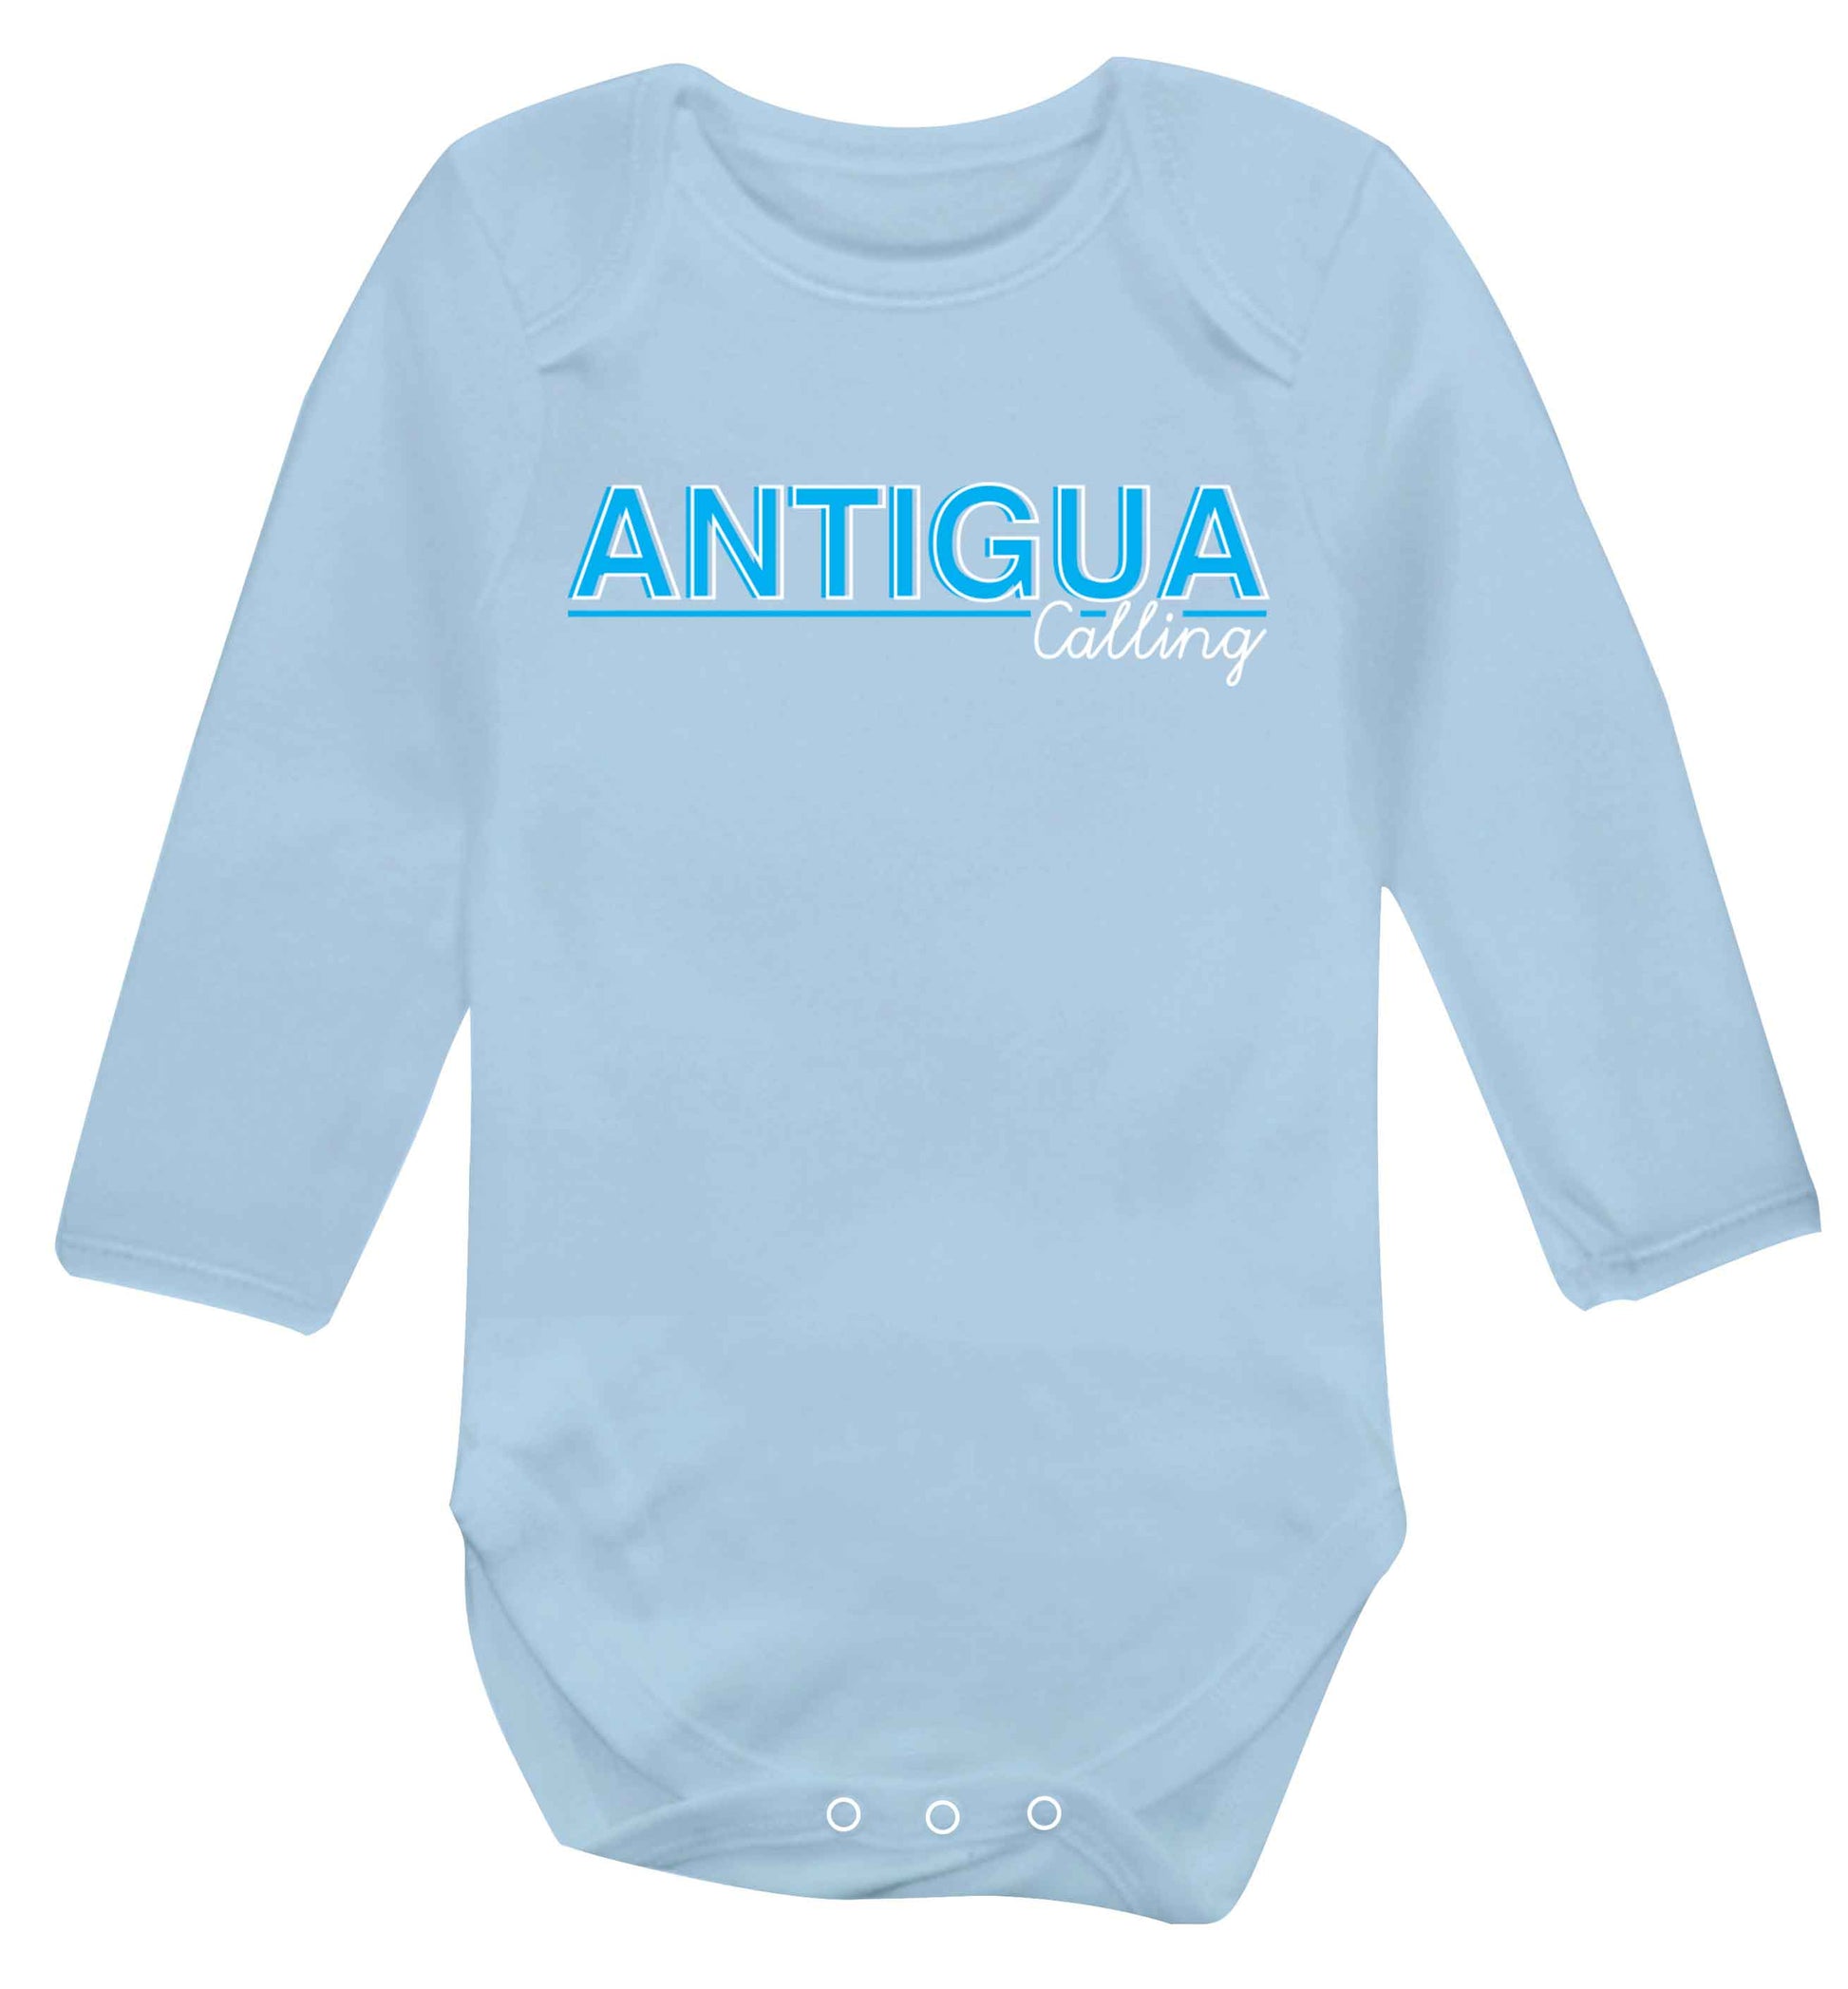 Antigua calling Baby Vest long sleeved pale blue 6-12 months